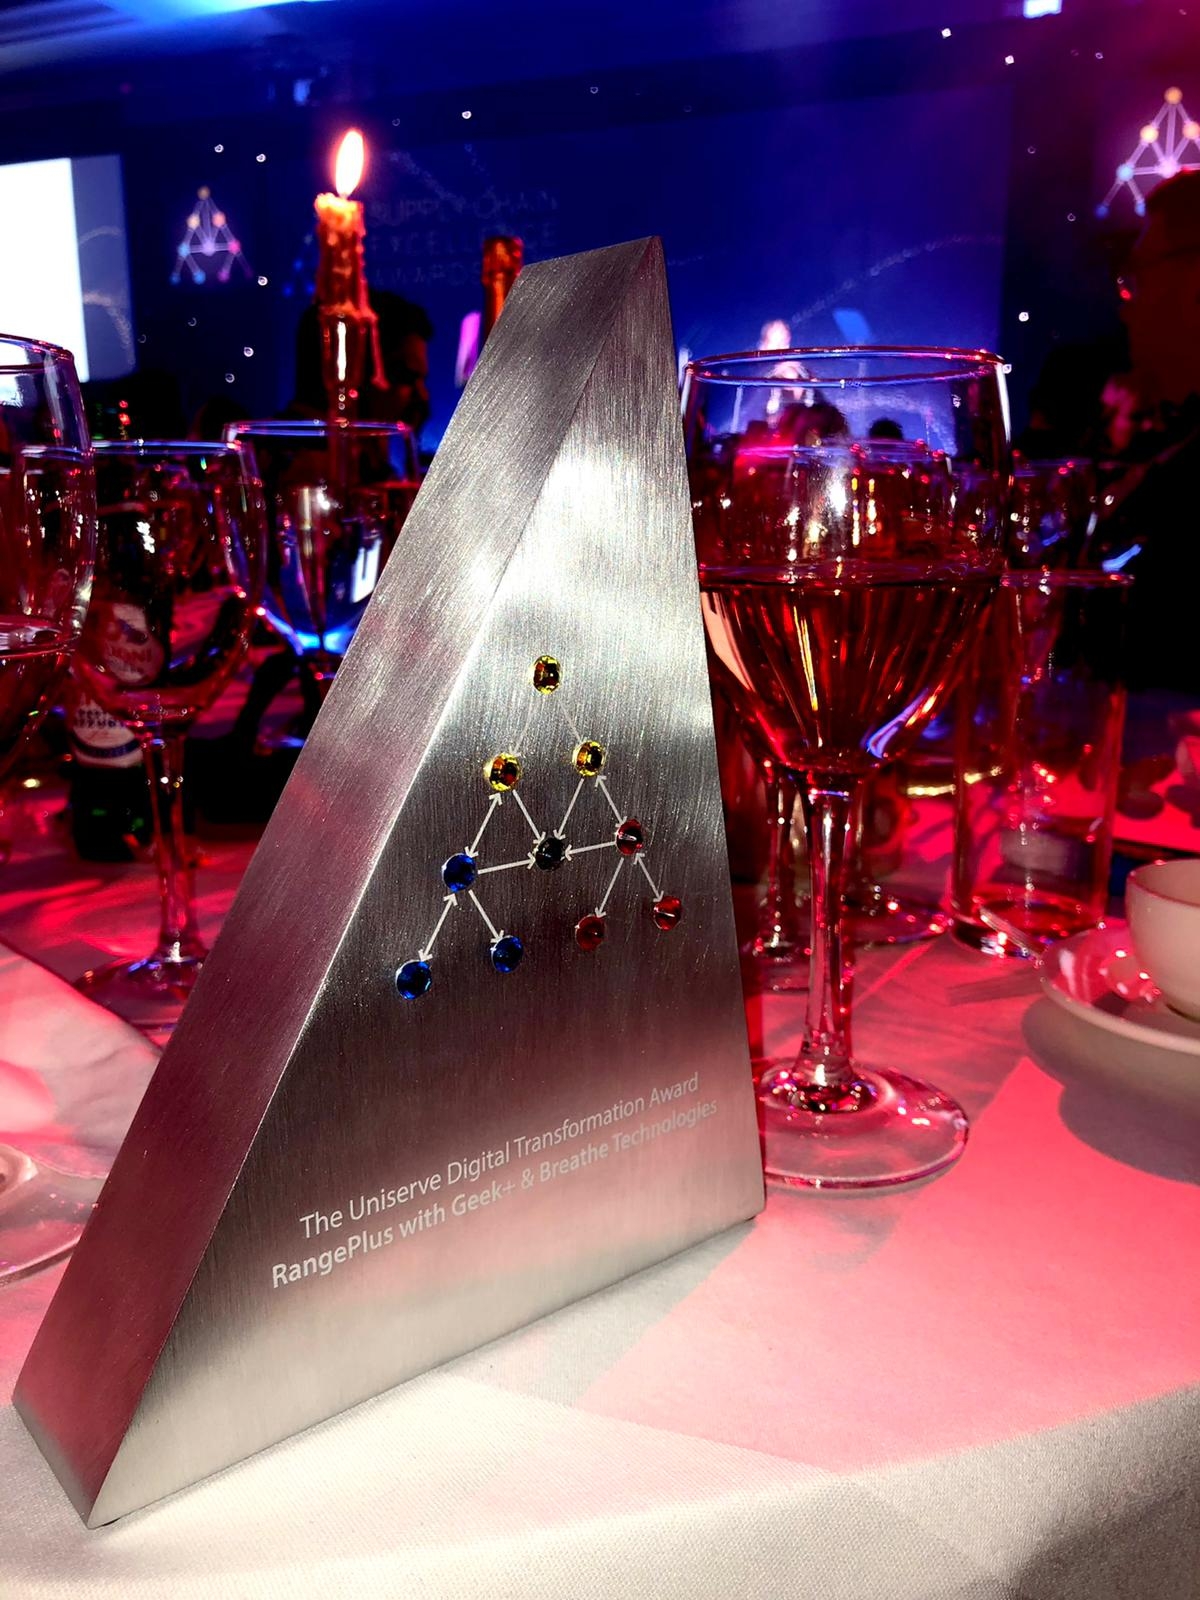 Geek+ wins Digital Transformation Award at the Supply Chain Excellence Awards